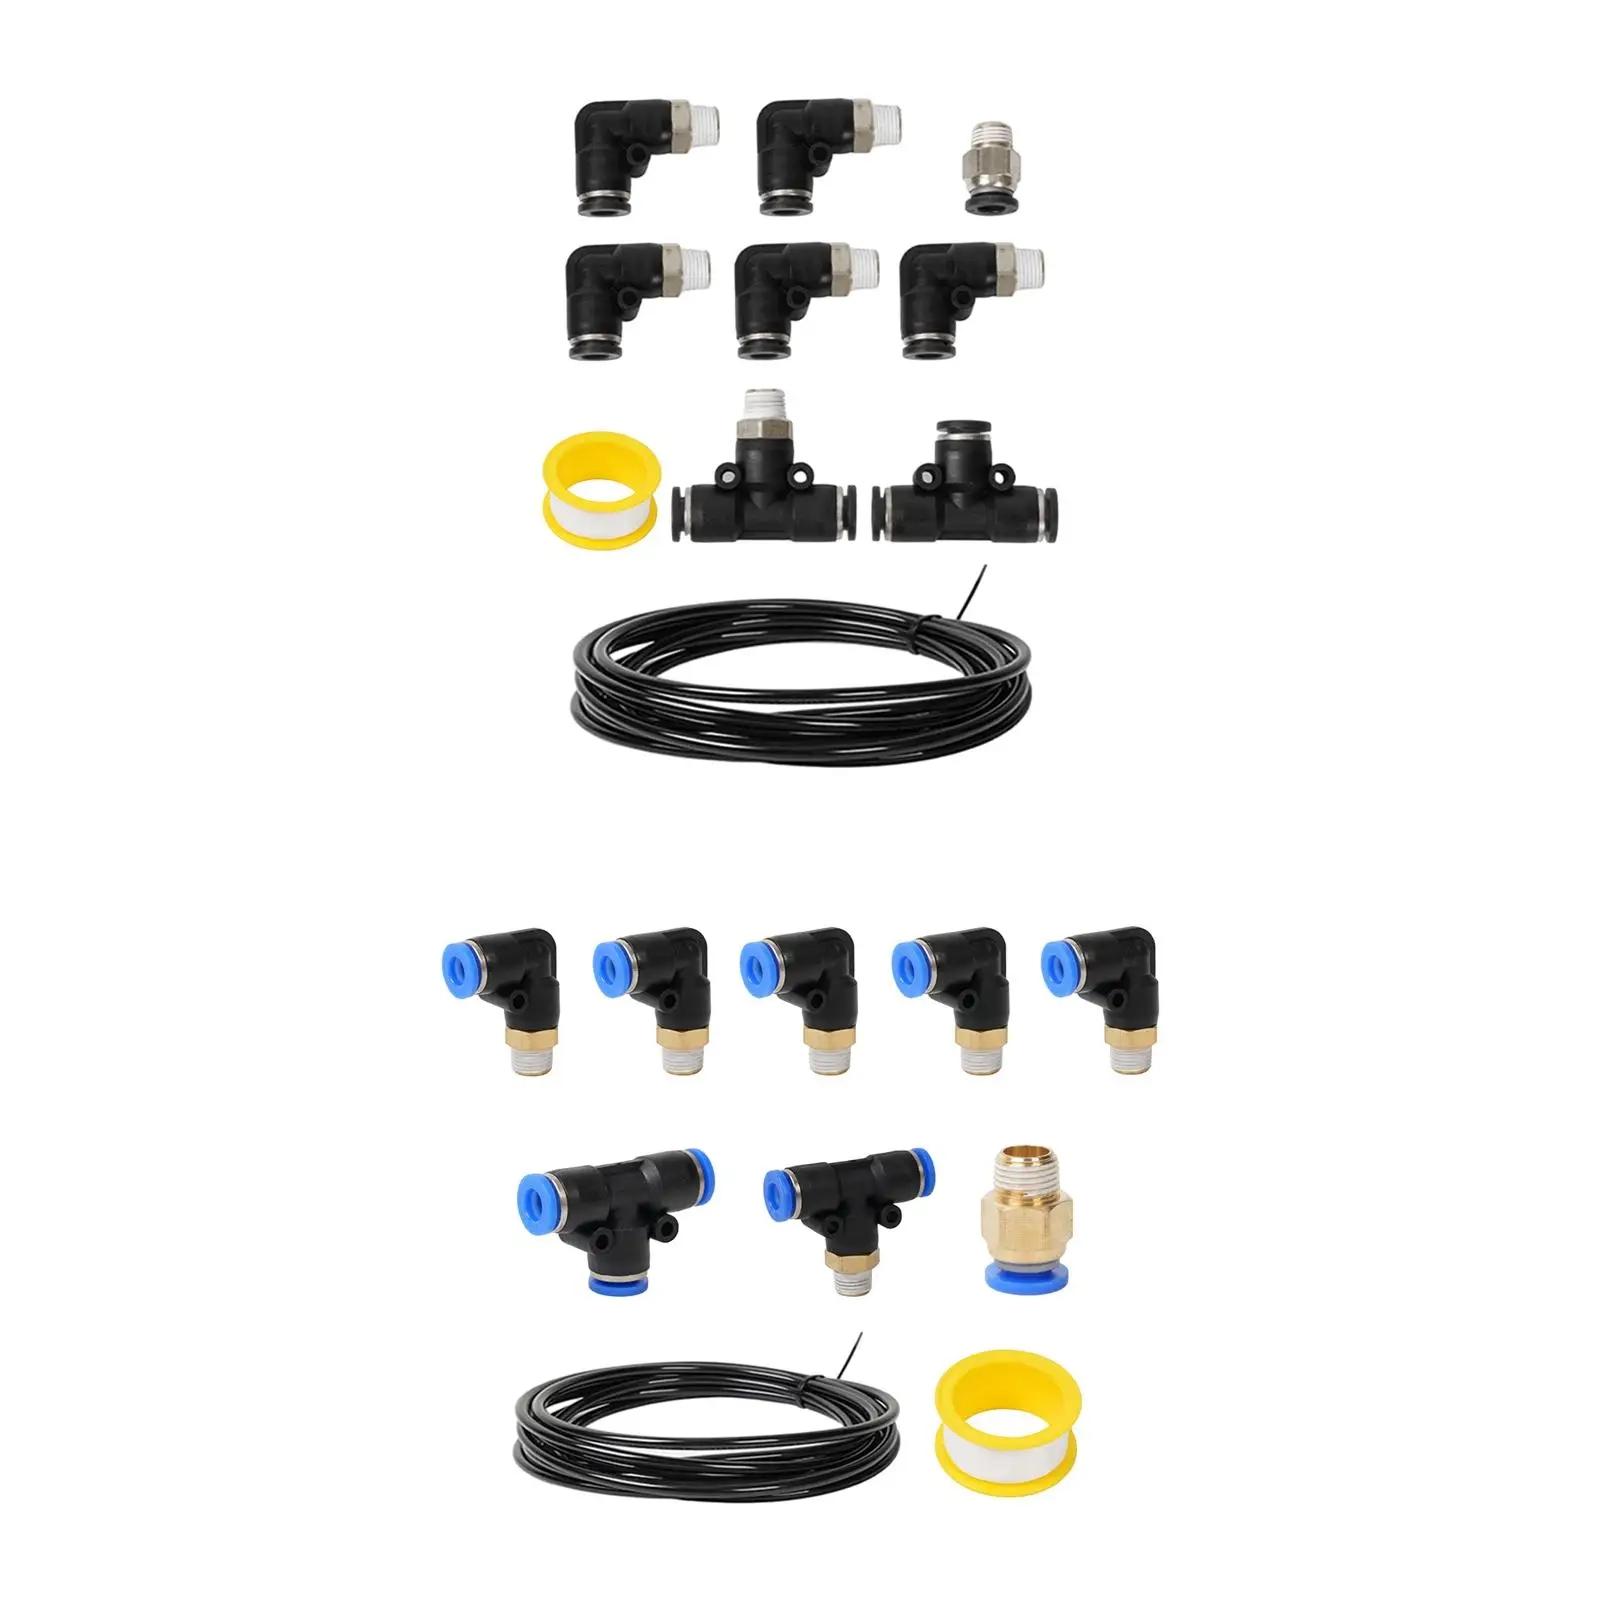 Wastegate Solenoid Connector Set Vacuum Fitting Kit for Vehicles